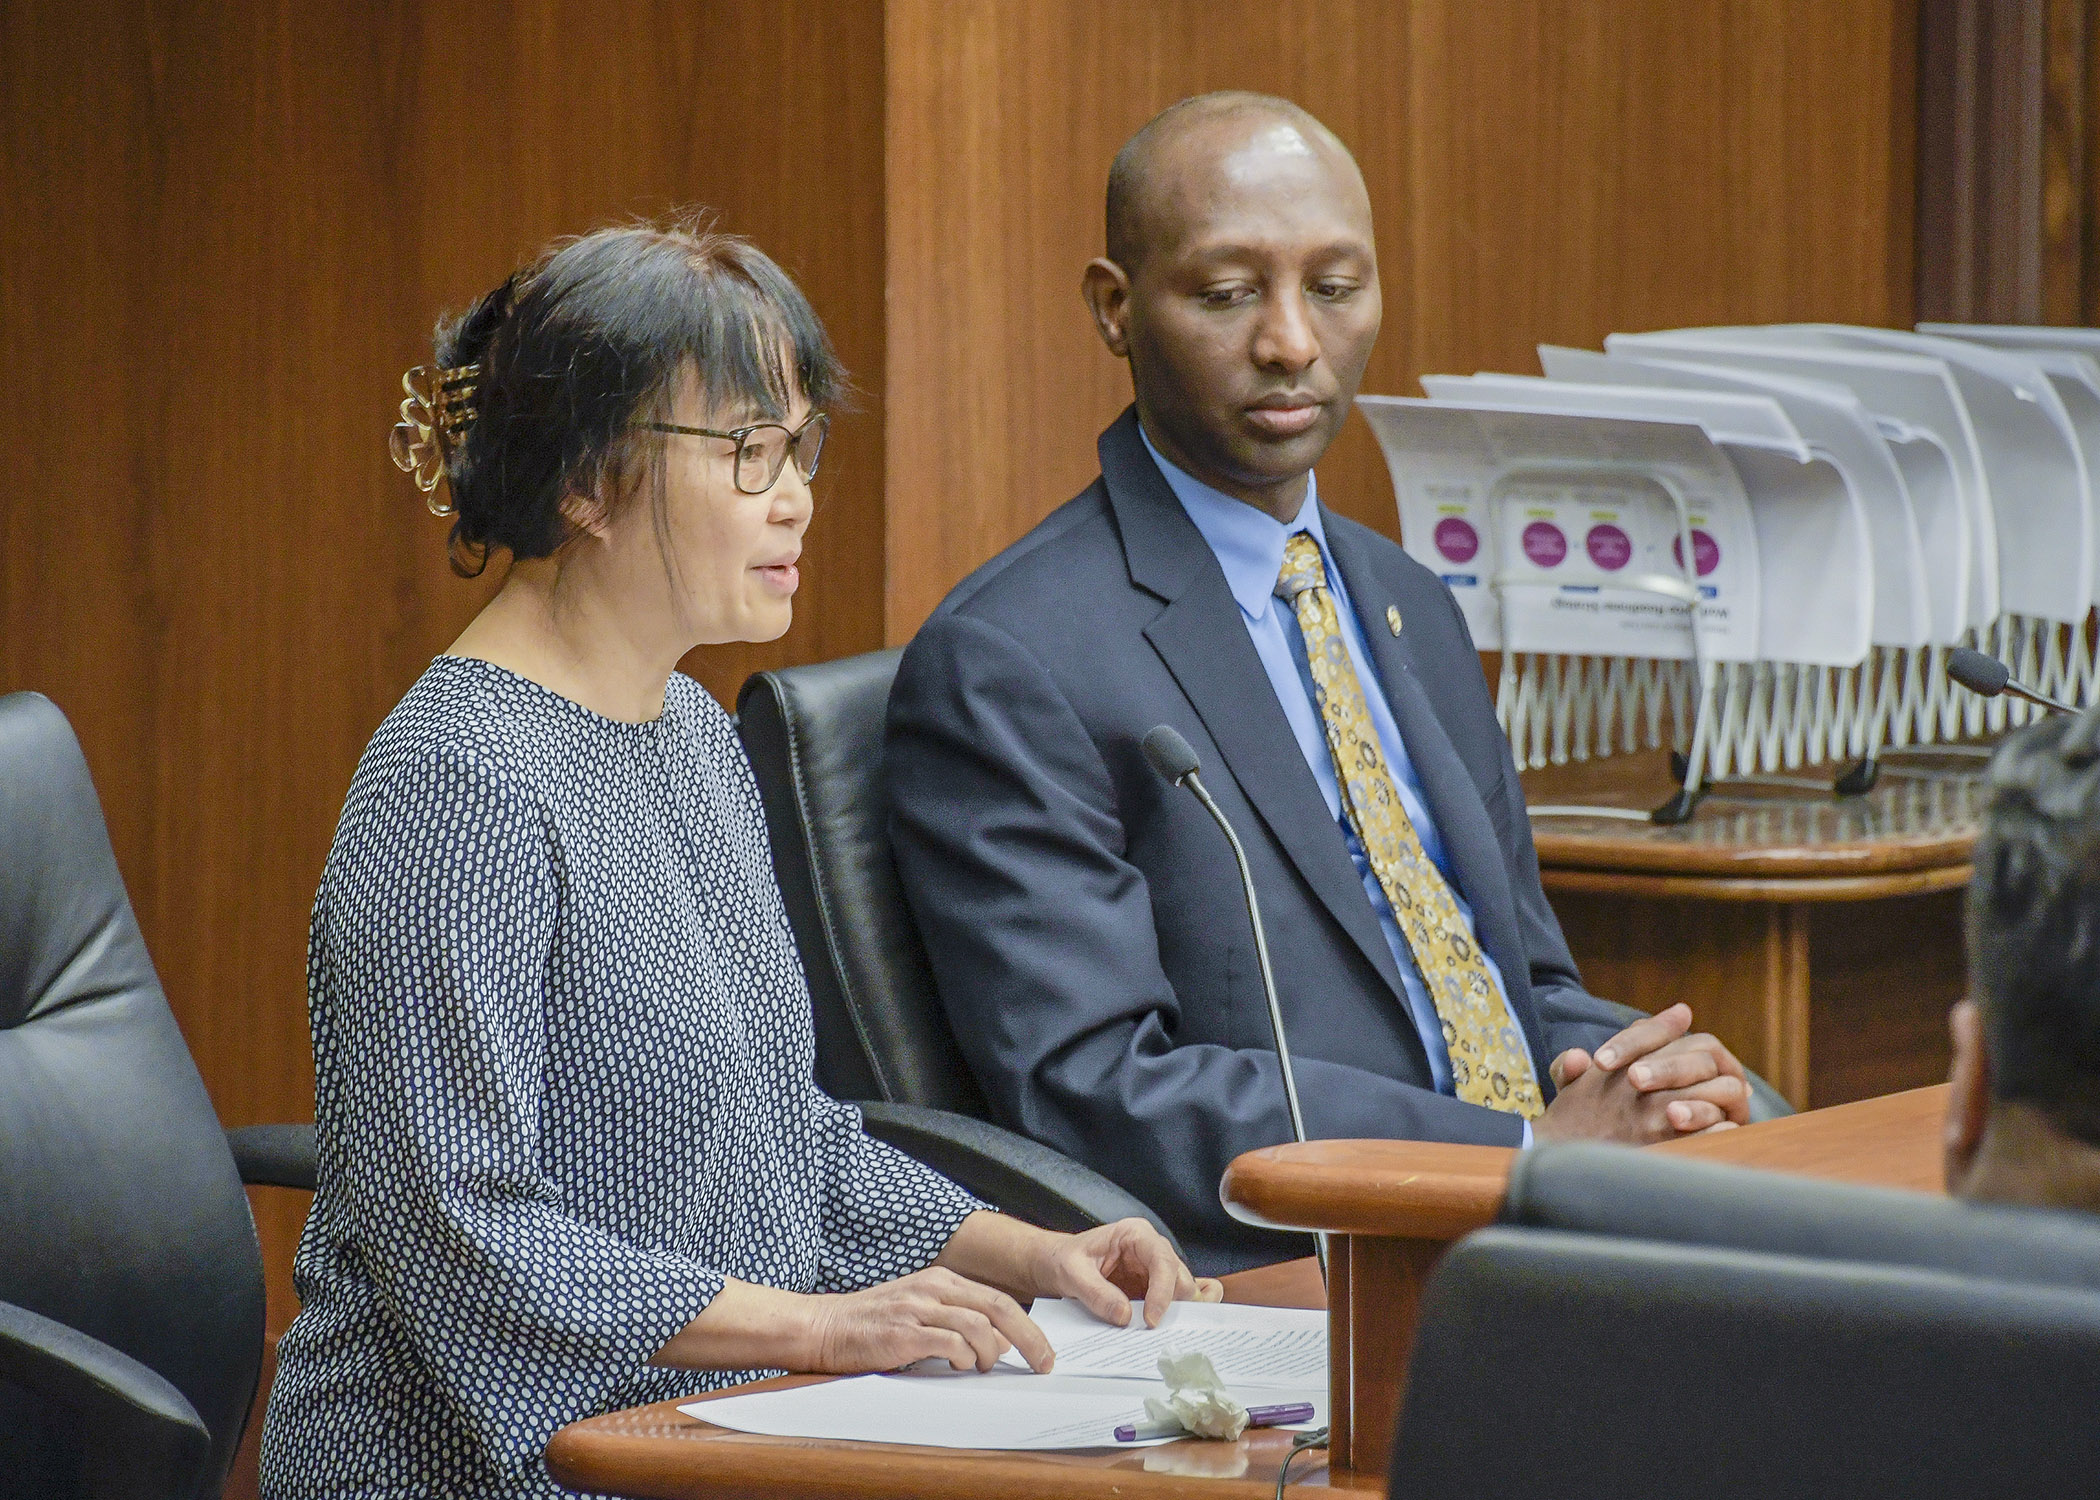 Ku She Saw, a new U.S. citizen, testifies before the House Jobs and Economic Development Finance Division in support of a bill sponsored by Rep. Mohamud Noor, right, that would provide funding for New American workforce training. Photo by Andrew VonBank